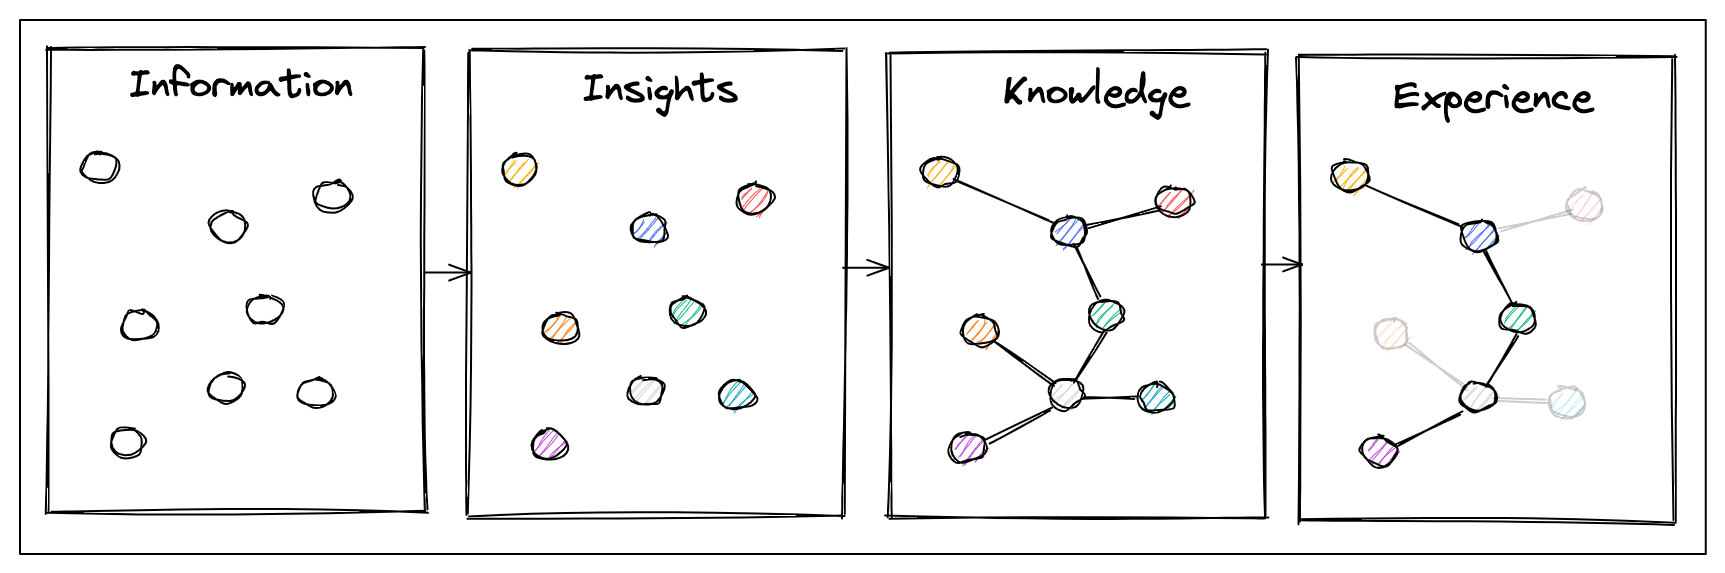 Connecting insights dots leads to building knowledge